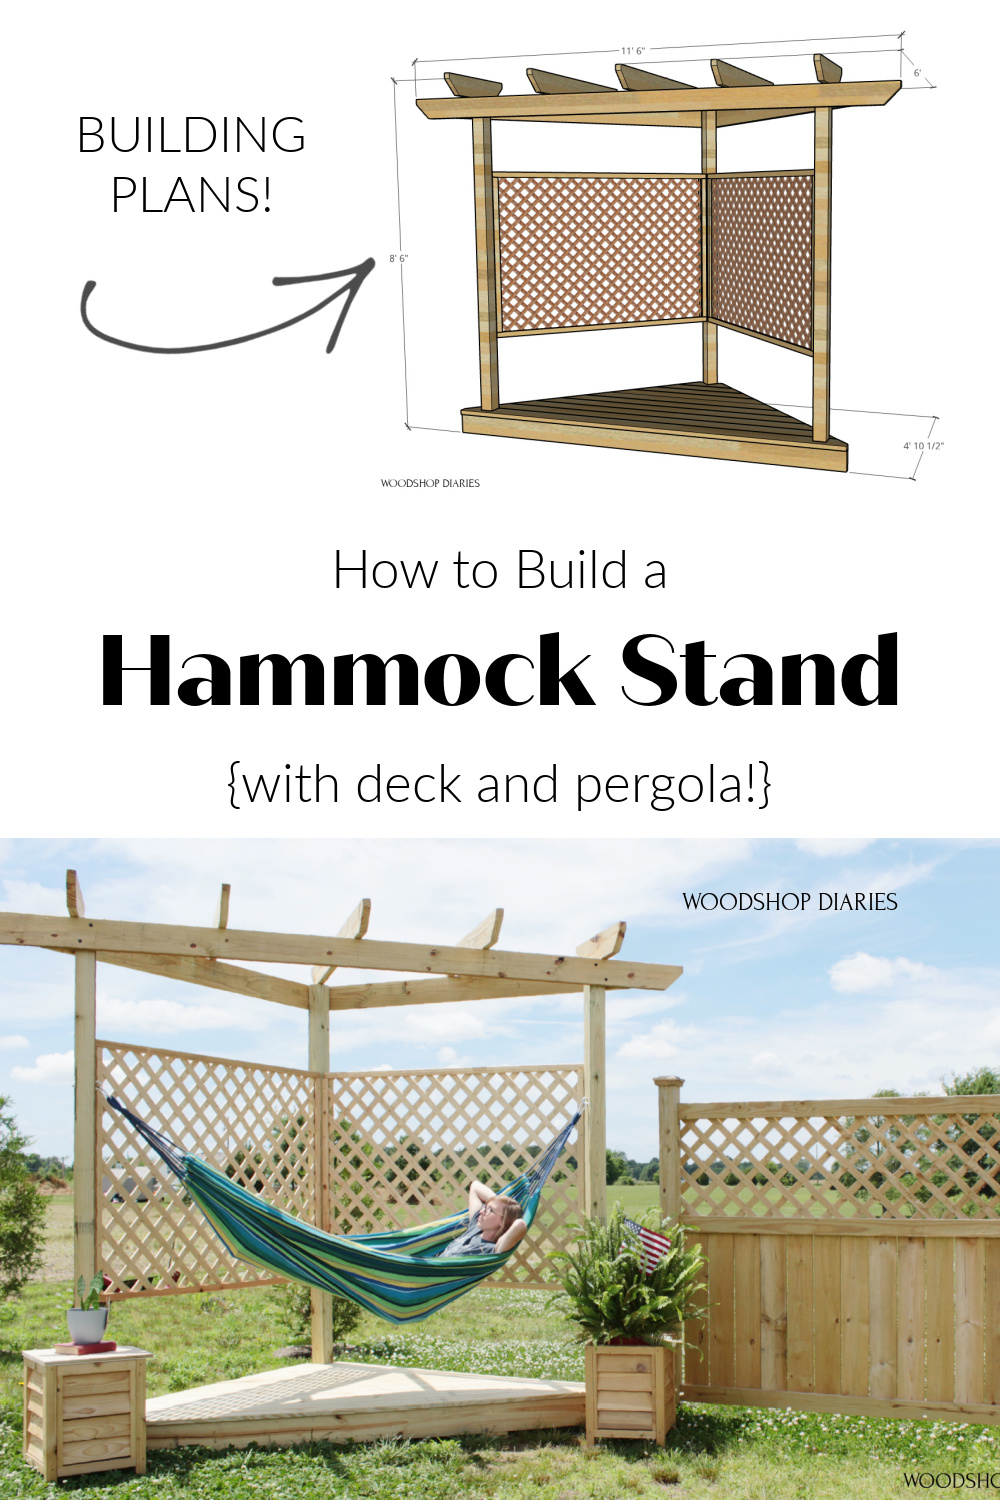 Pinterest collage showing overall hammock stand dimensions at top and Shara laying in hammock on bottom with text "how to build a hammock stand with deck and pergola"